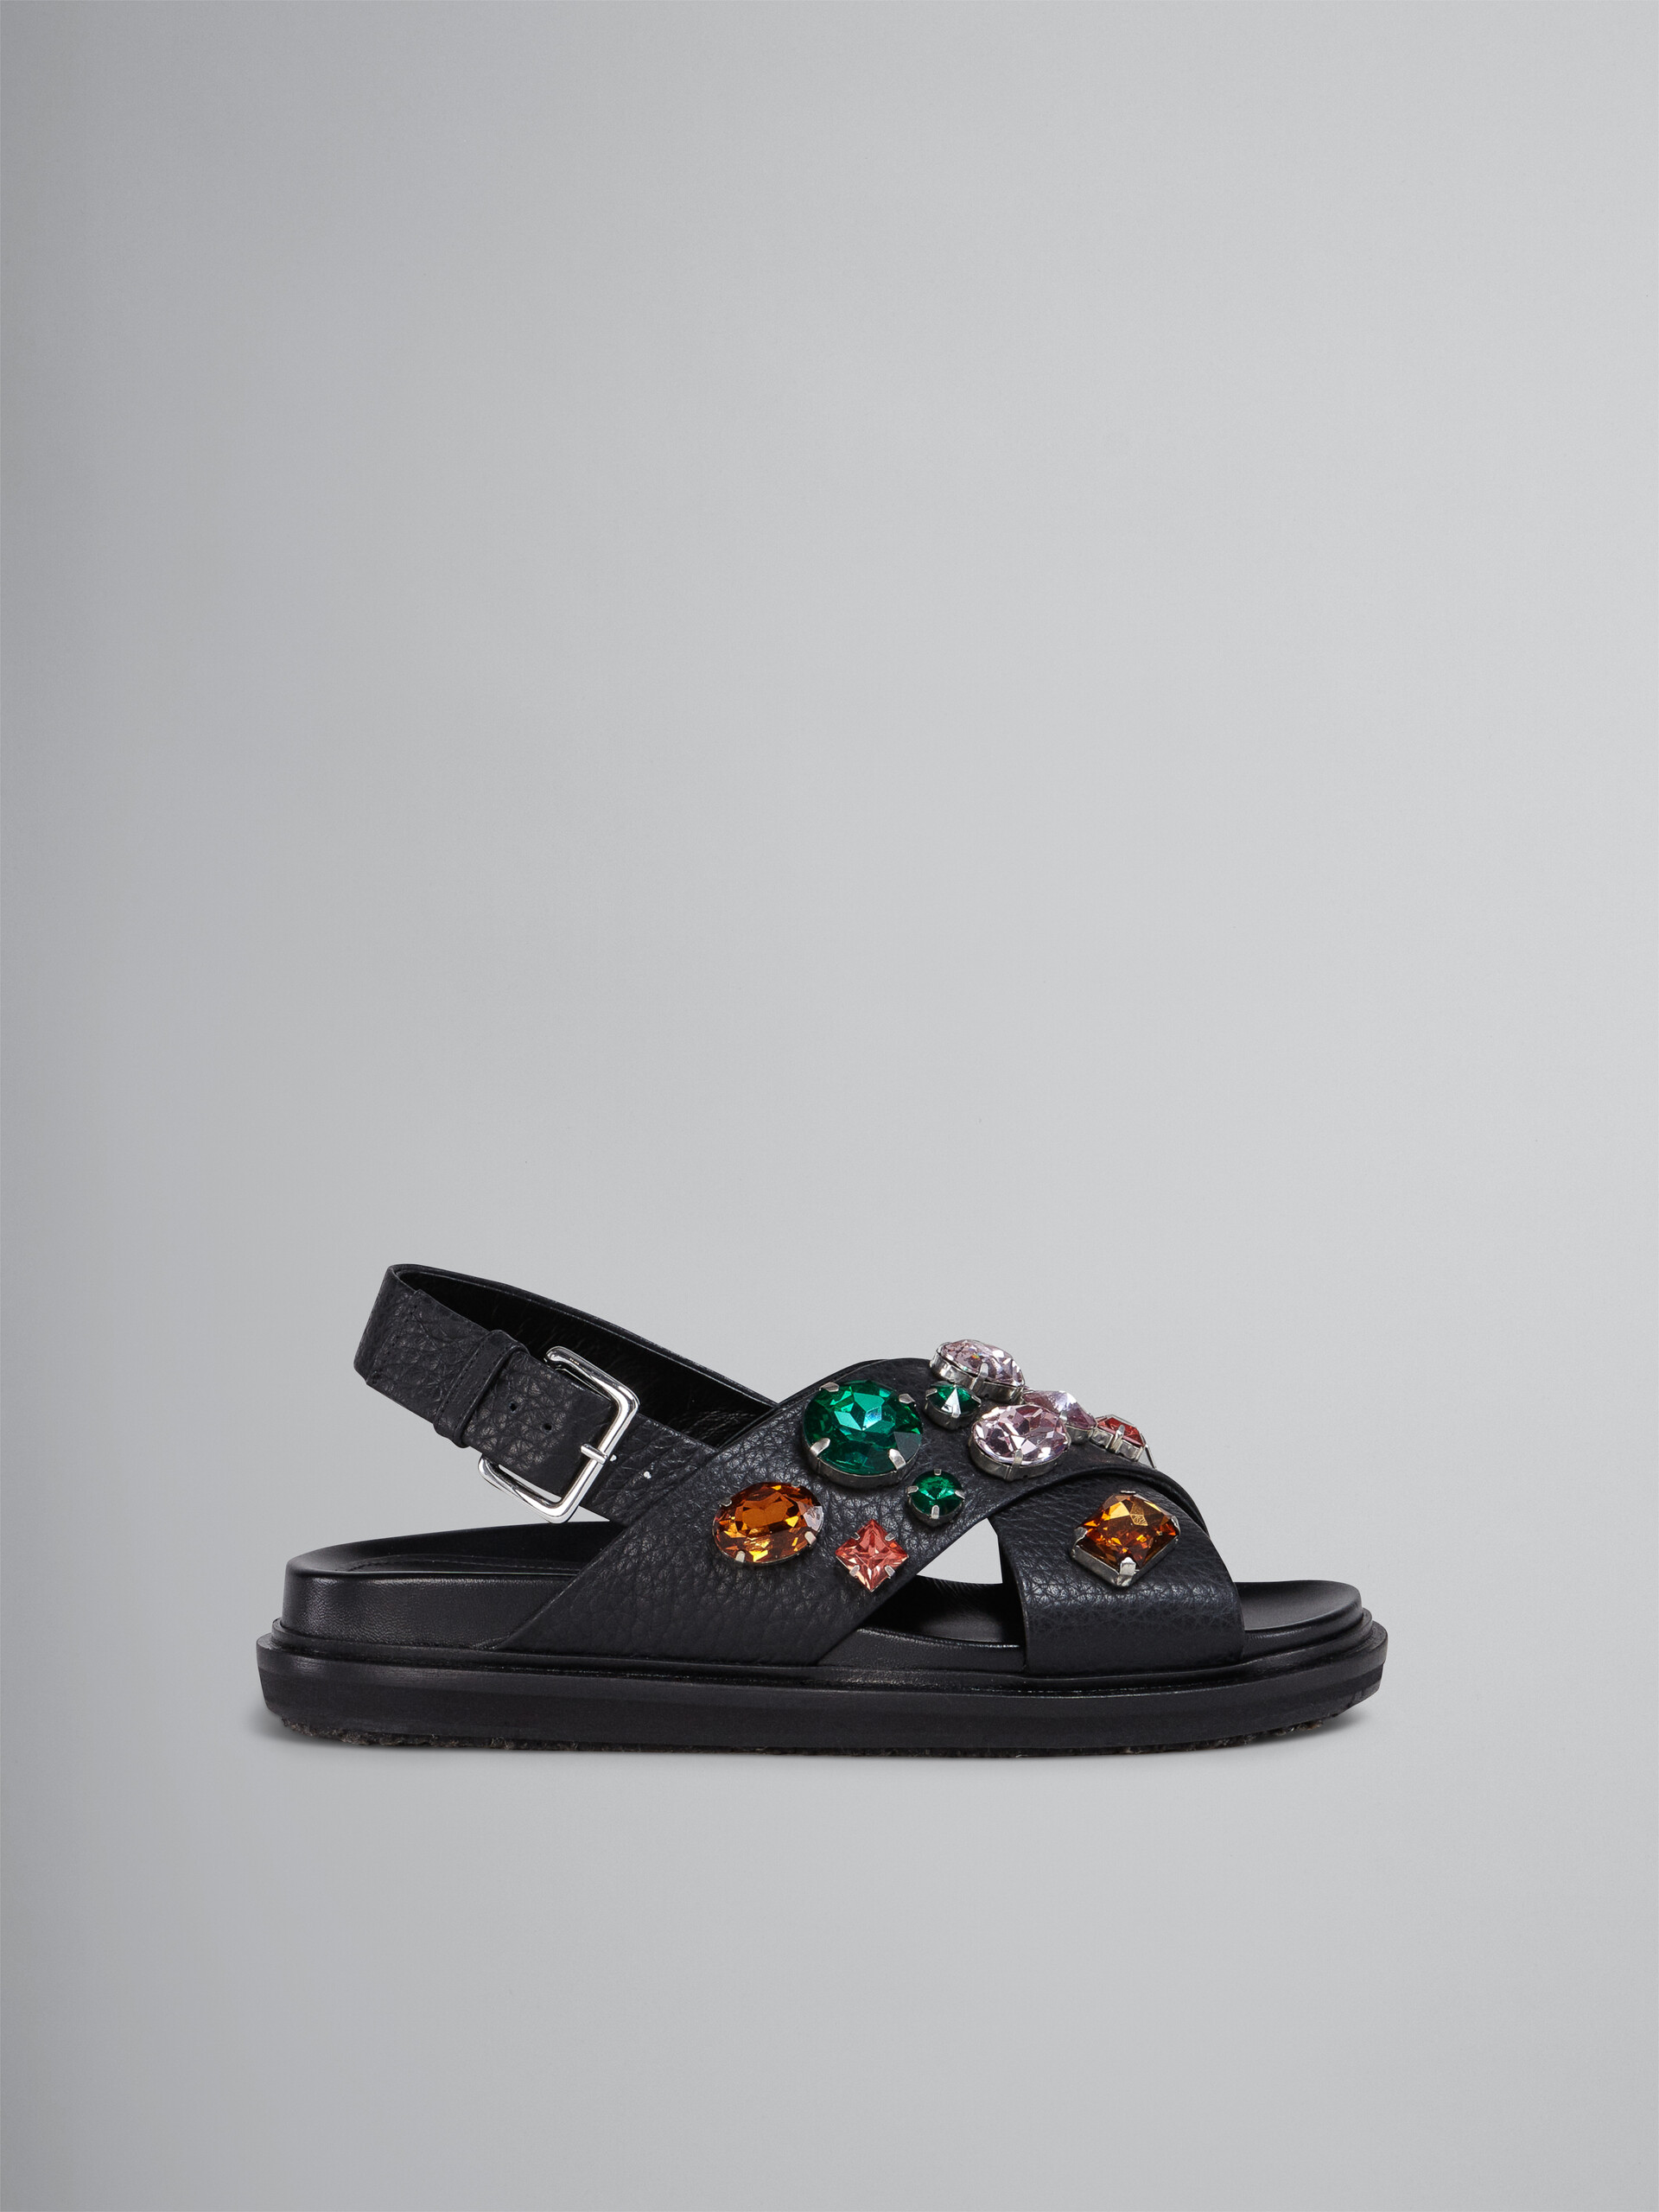 Glass beads grained leather fussbett - Sandals - Image 1